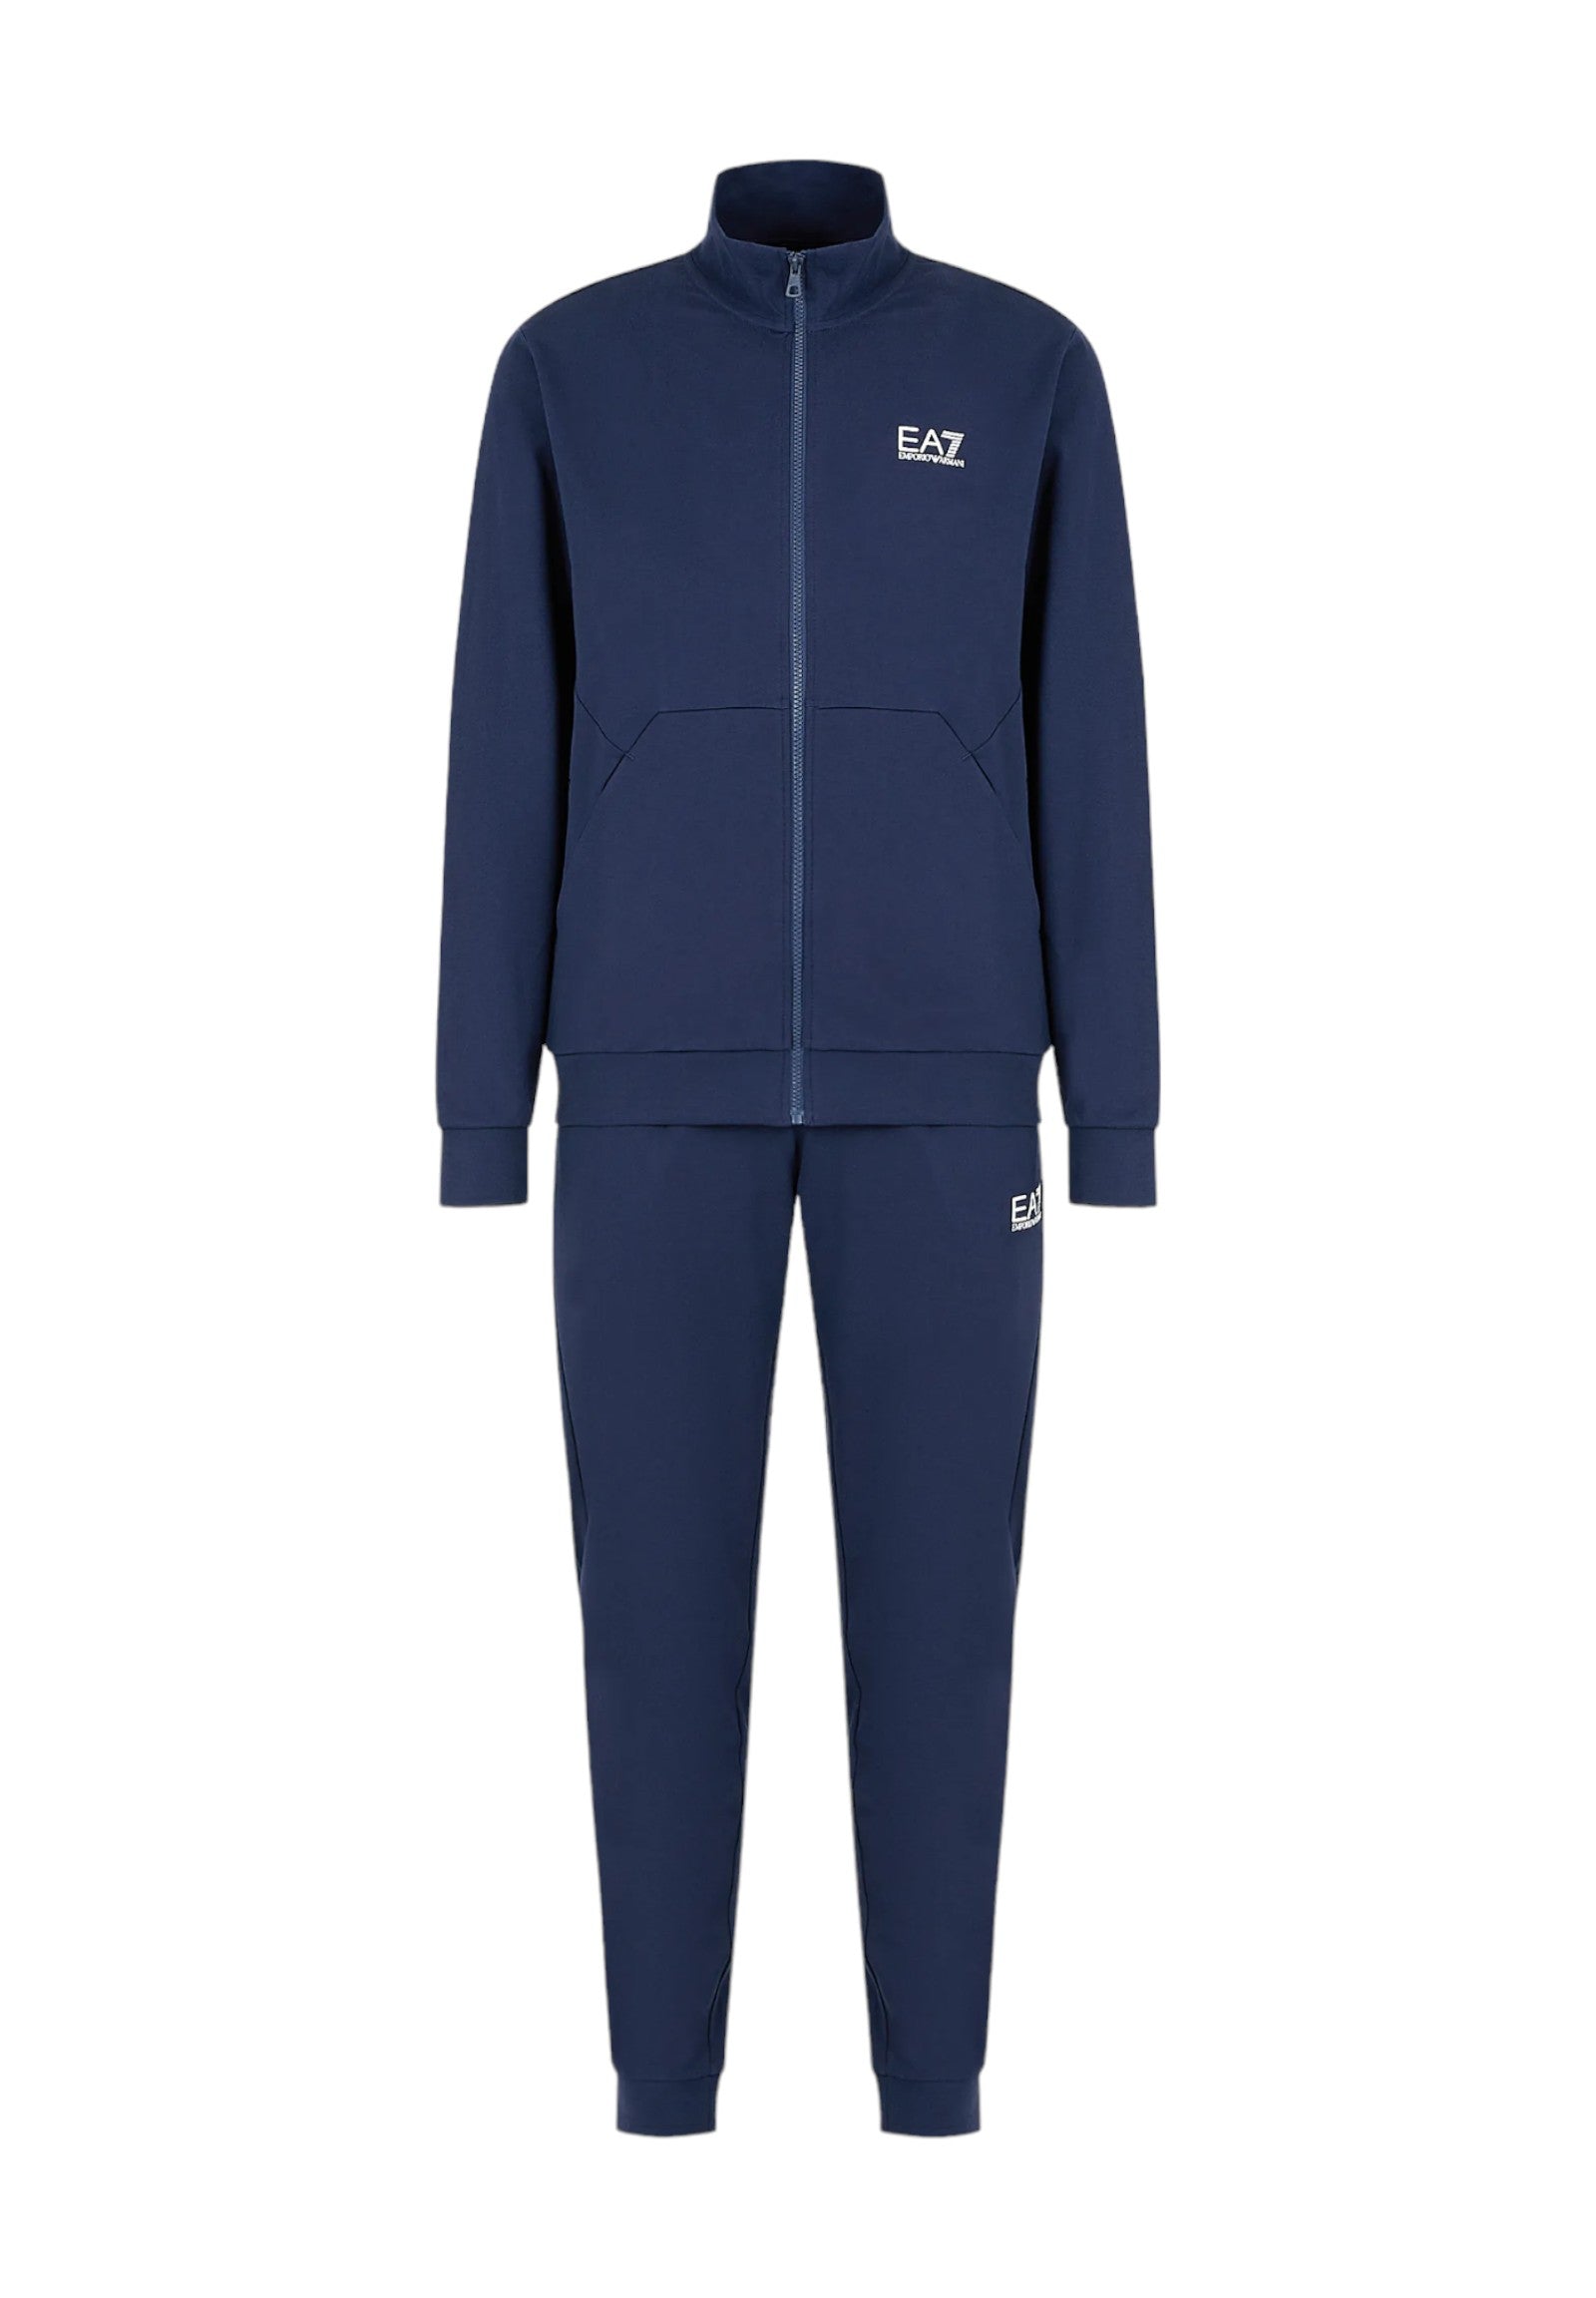 Complete Tracksuit 3dpv75 Navy Blue